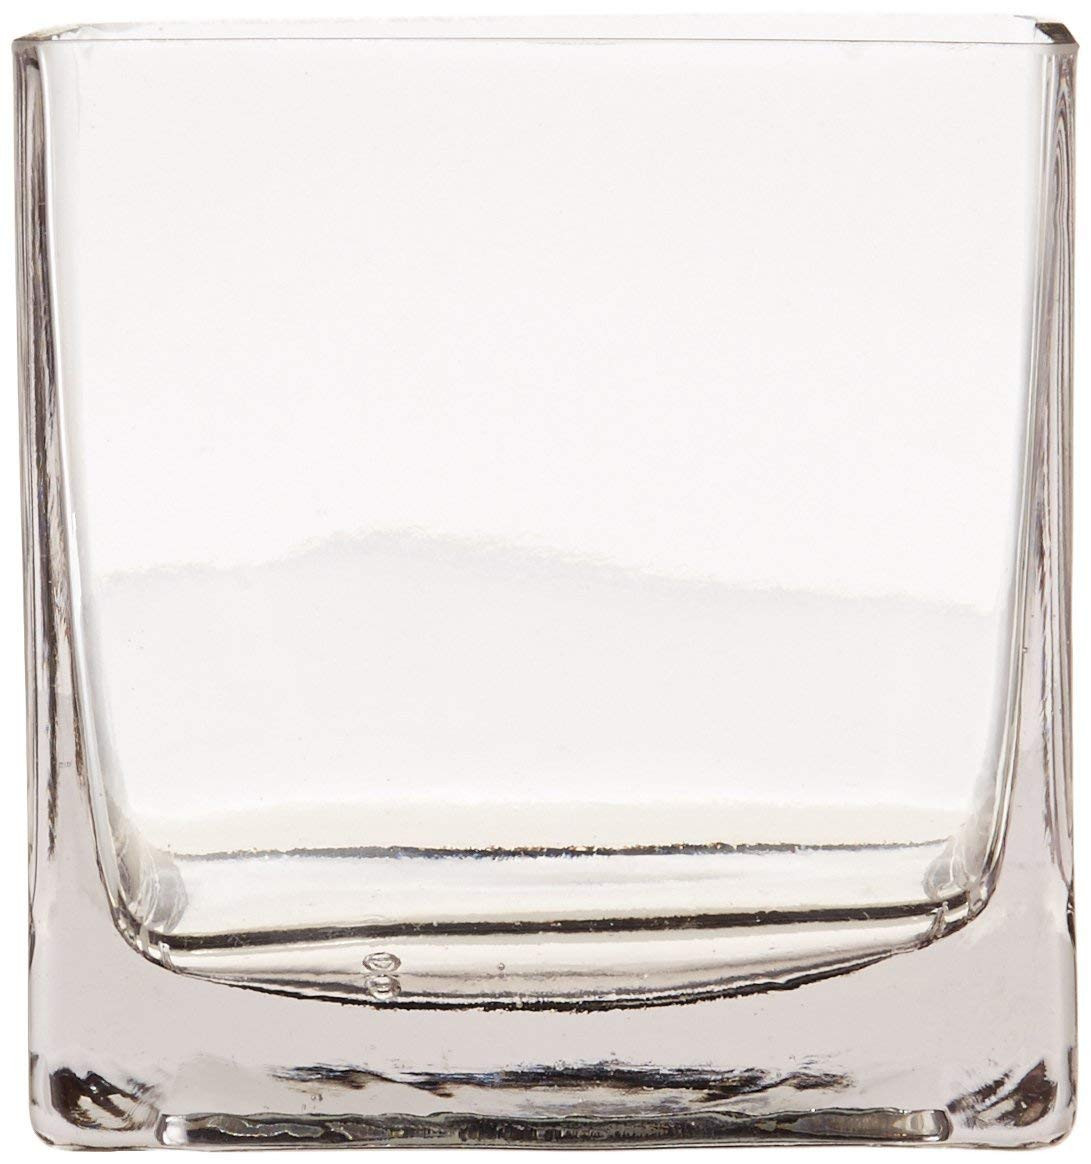 13 Unique Rectangular Glass Vases for Centerpieces 2024 free download rectangular glass vases for centerpieces of amazon com 12piece 4 square crystal clear glass vase home kitchen in 61odrrfbtgl sl1164